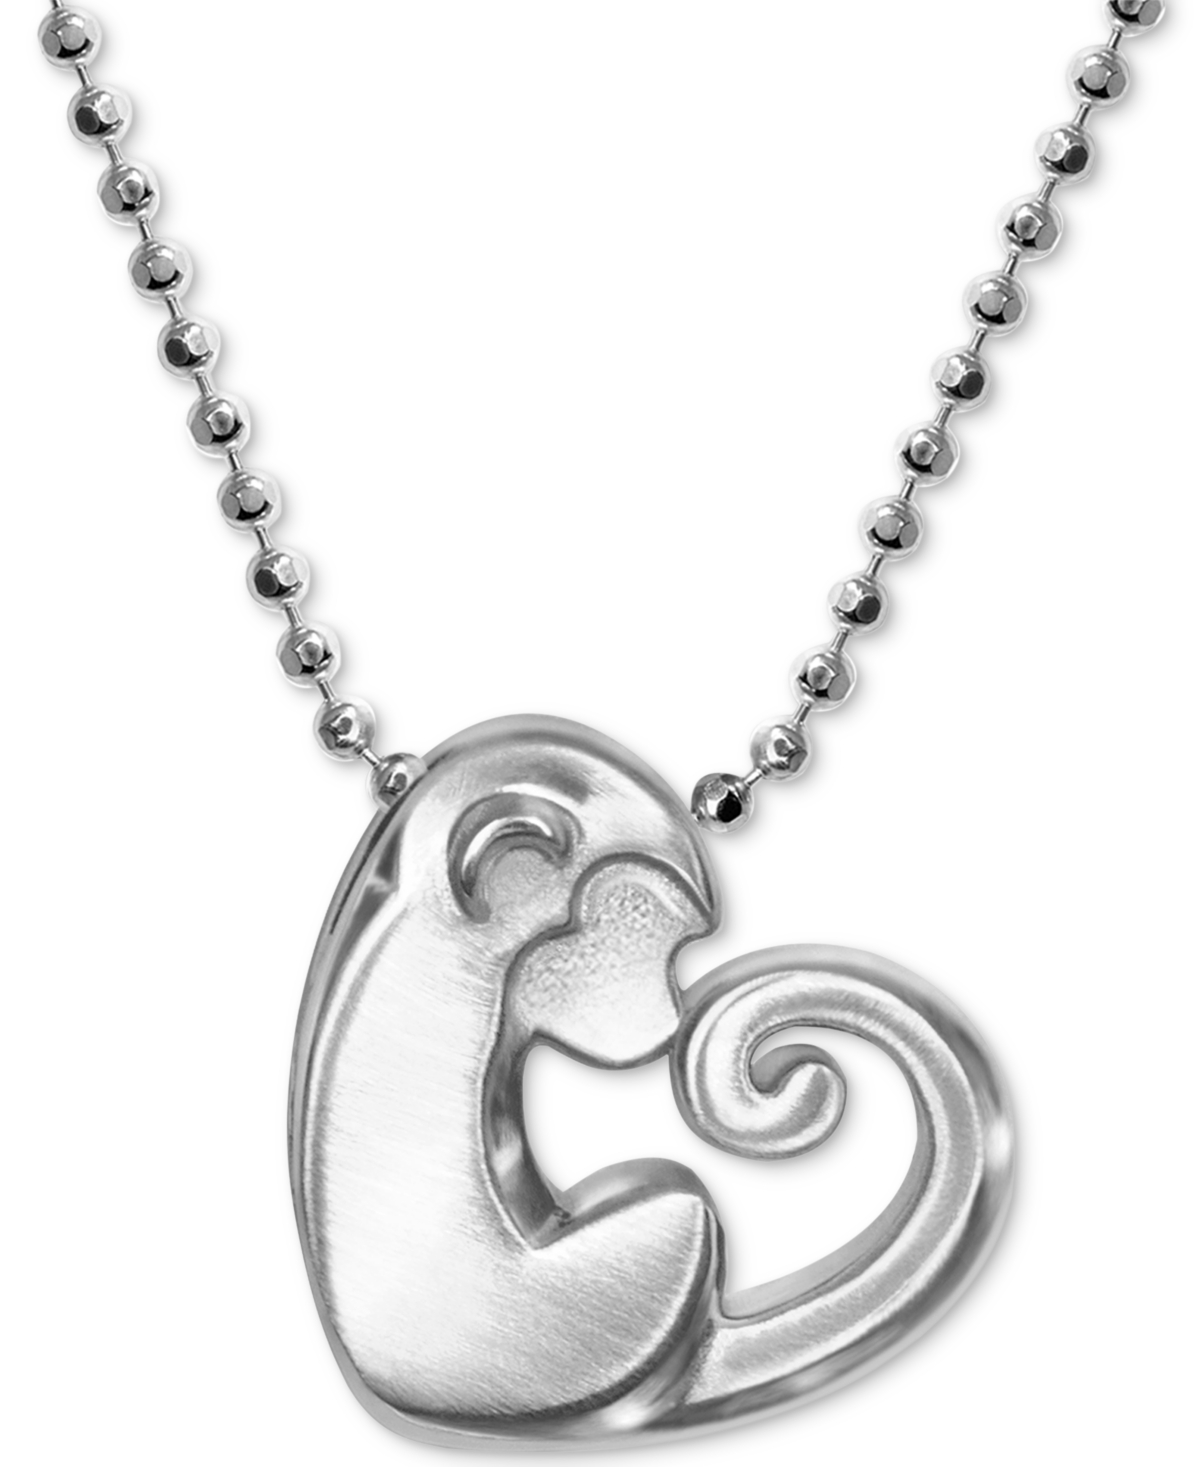 Little Activist Love Monkey Charm 16" Pendant Necklace in Sterling Silver - Sterling Silver